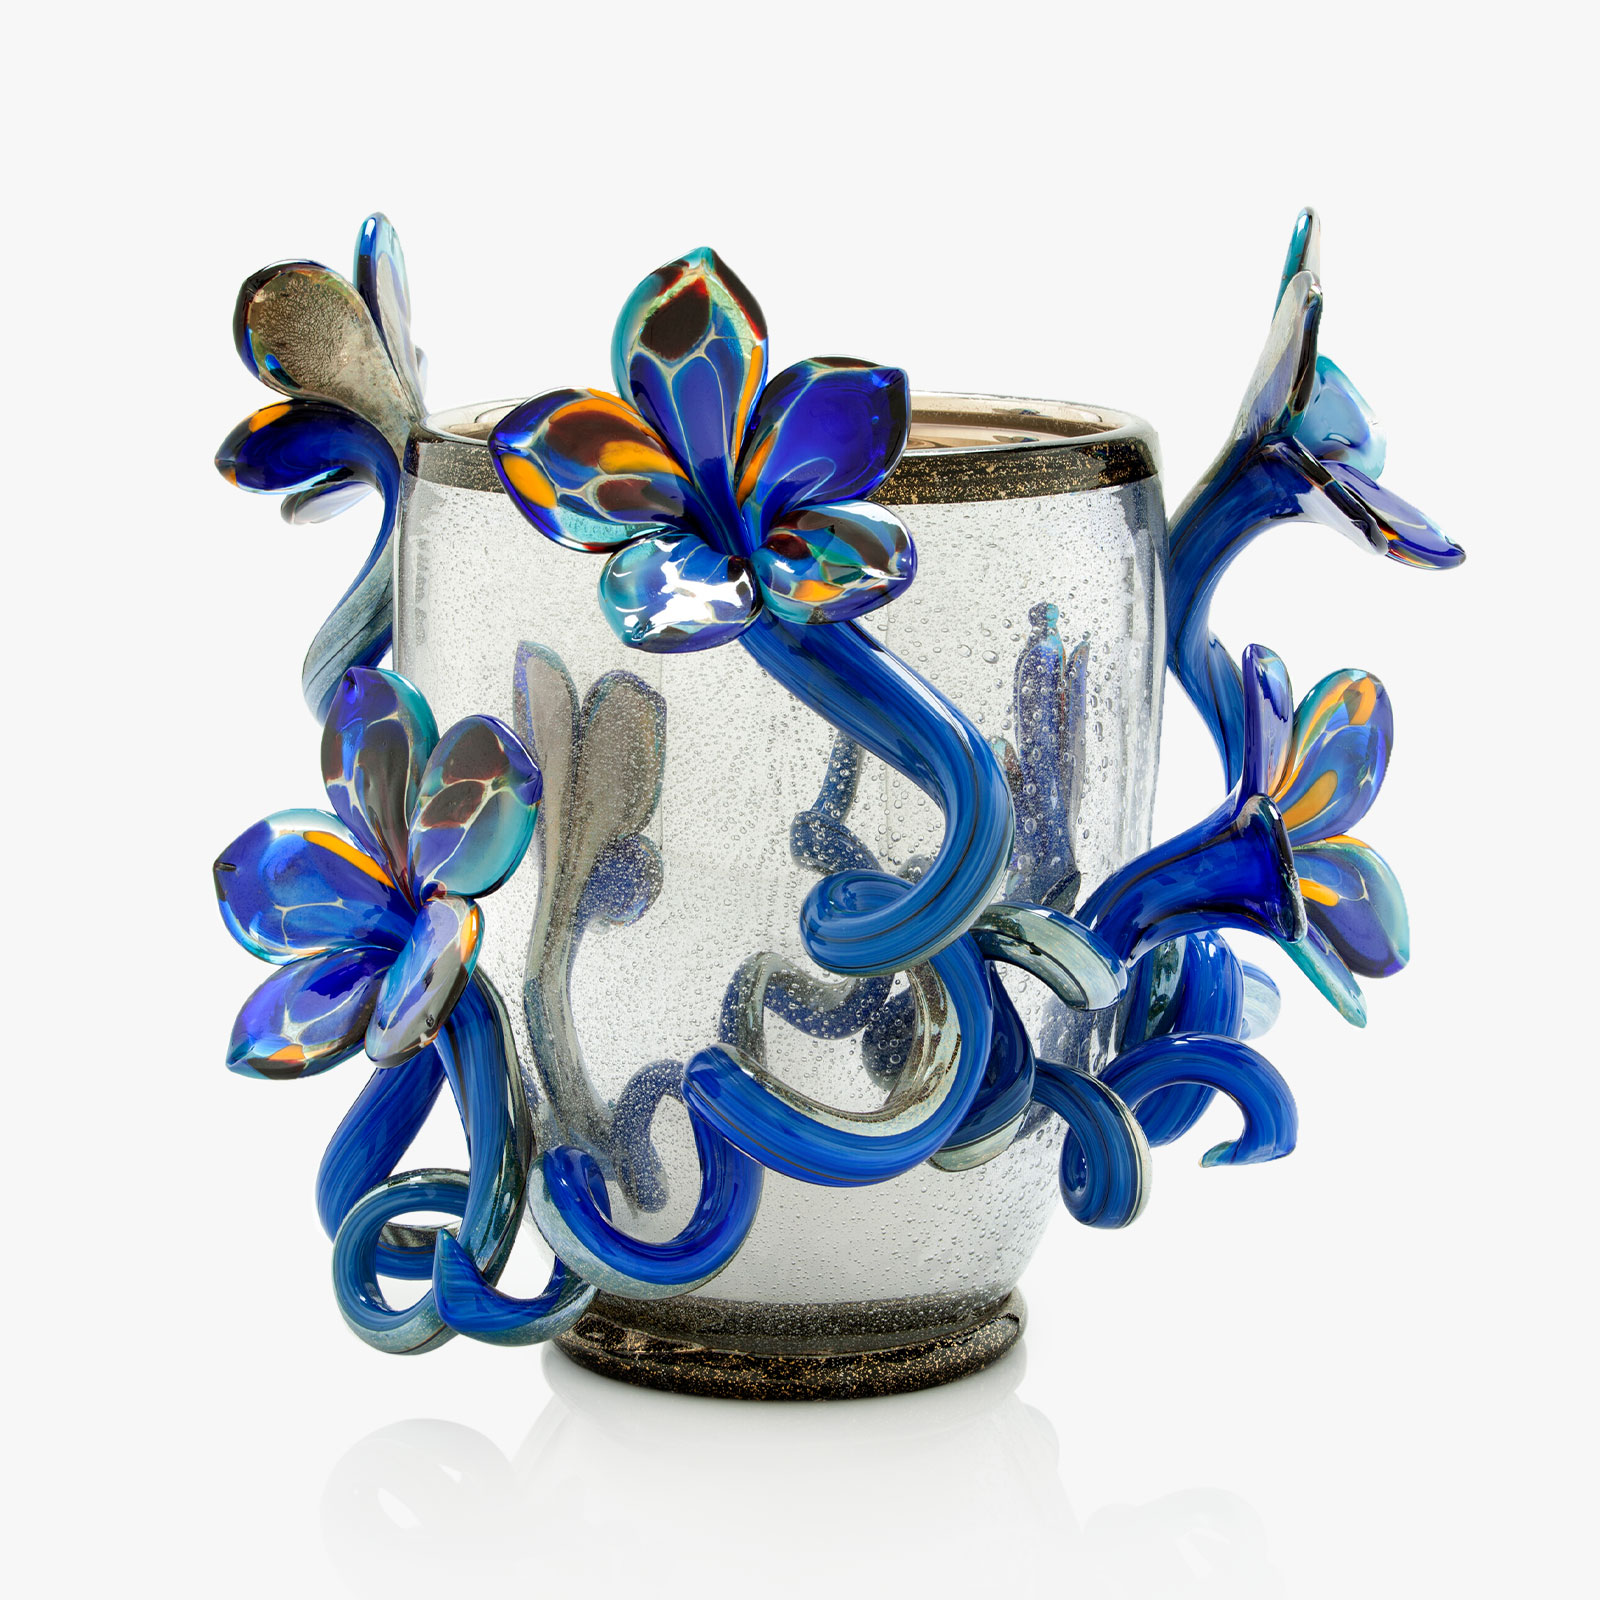 Silvered Venetian with Cerulean Flowers, 2014 by Dale Chihuly